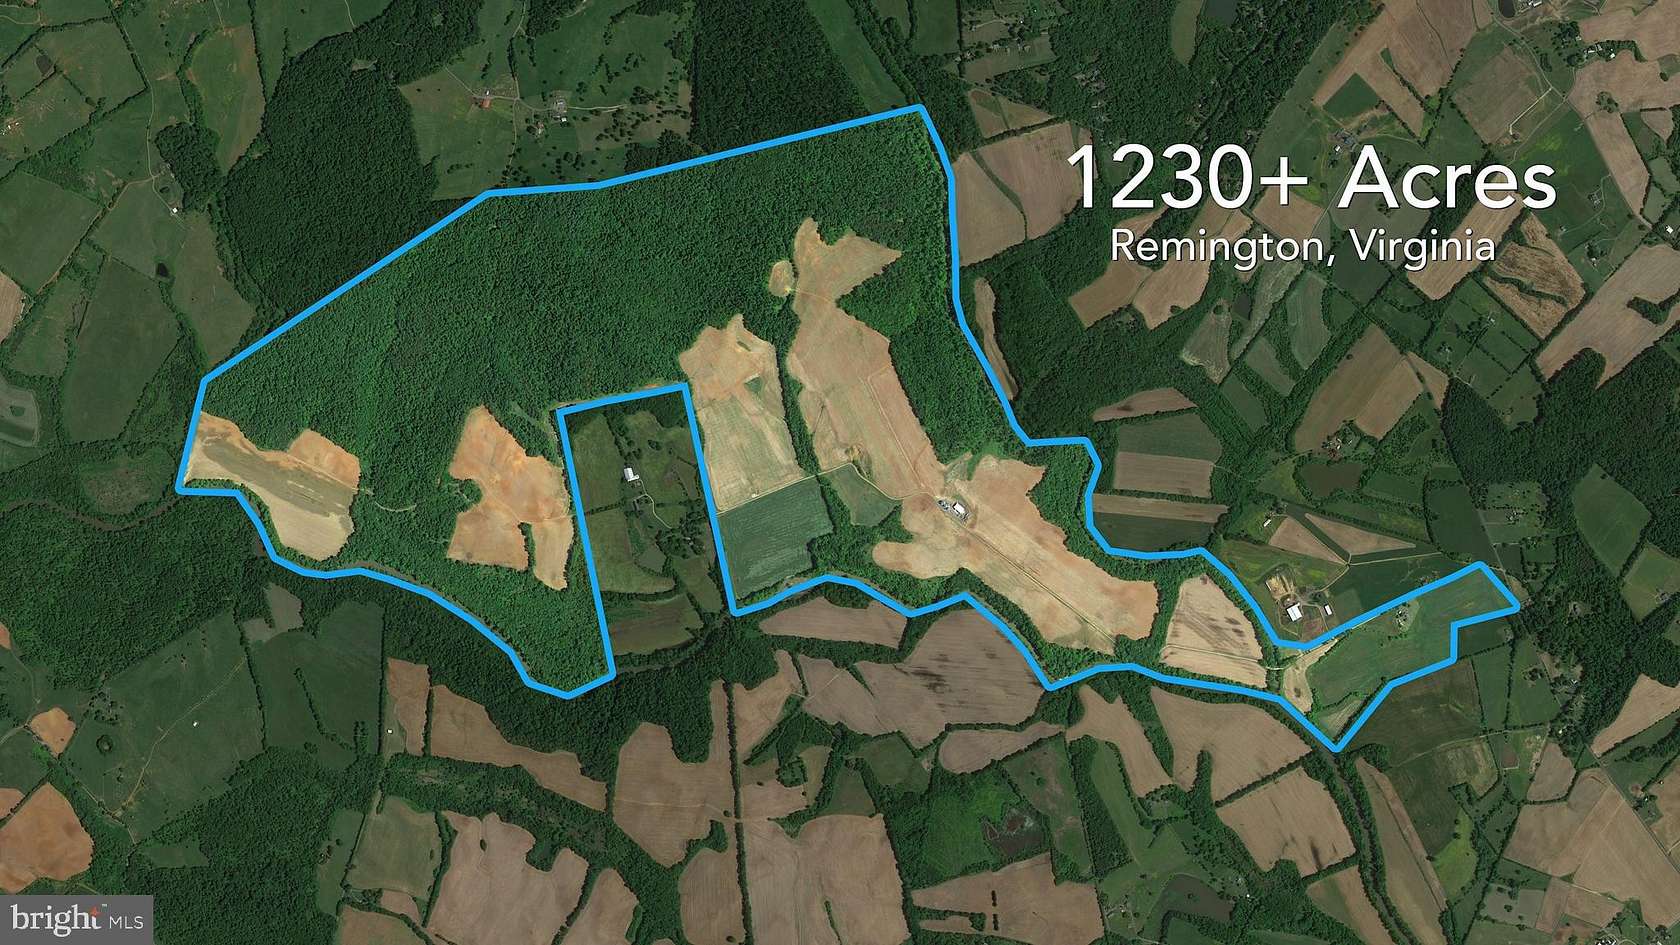 757 Acres of Agricultural Land for Sale in Remington, Virginia